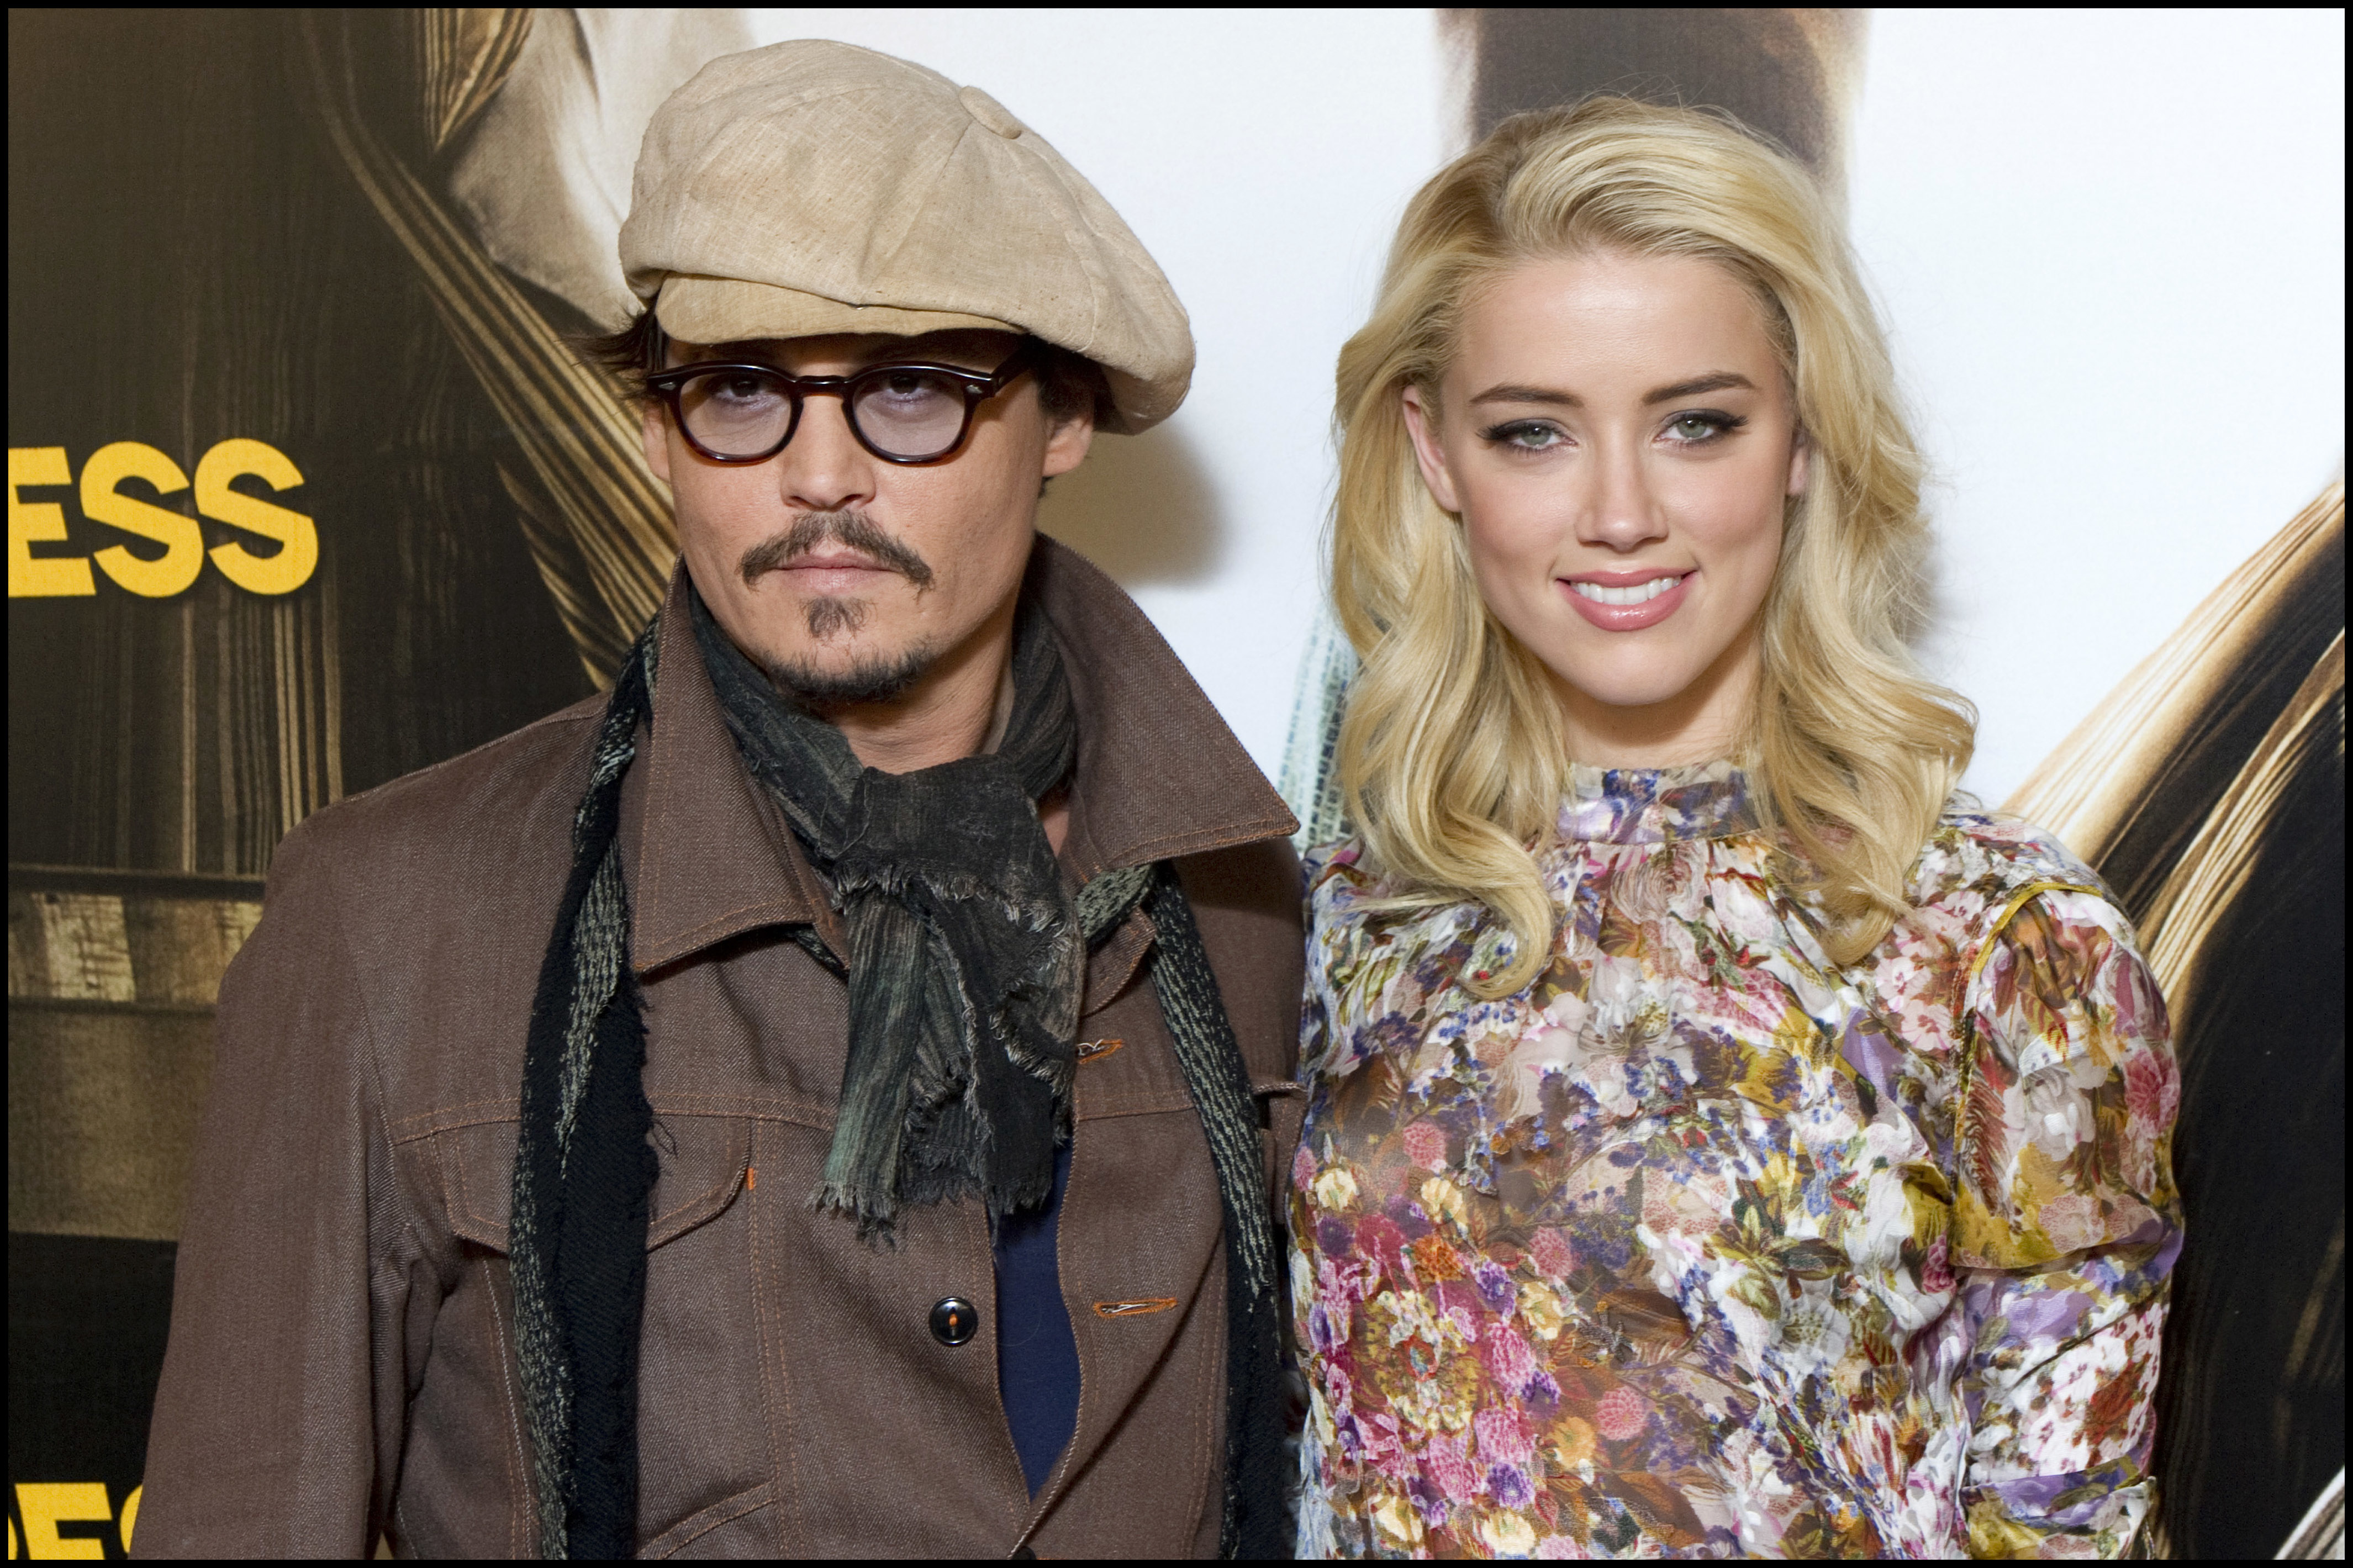 Johnny Depp and Amber Heard attend the "Rum Express" (Rum Diary) photocall on November 8, 2011 in Paris | Source: Getty Images